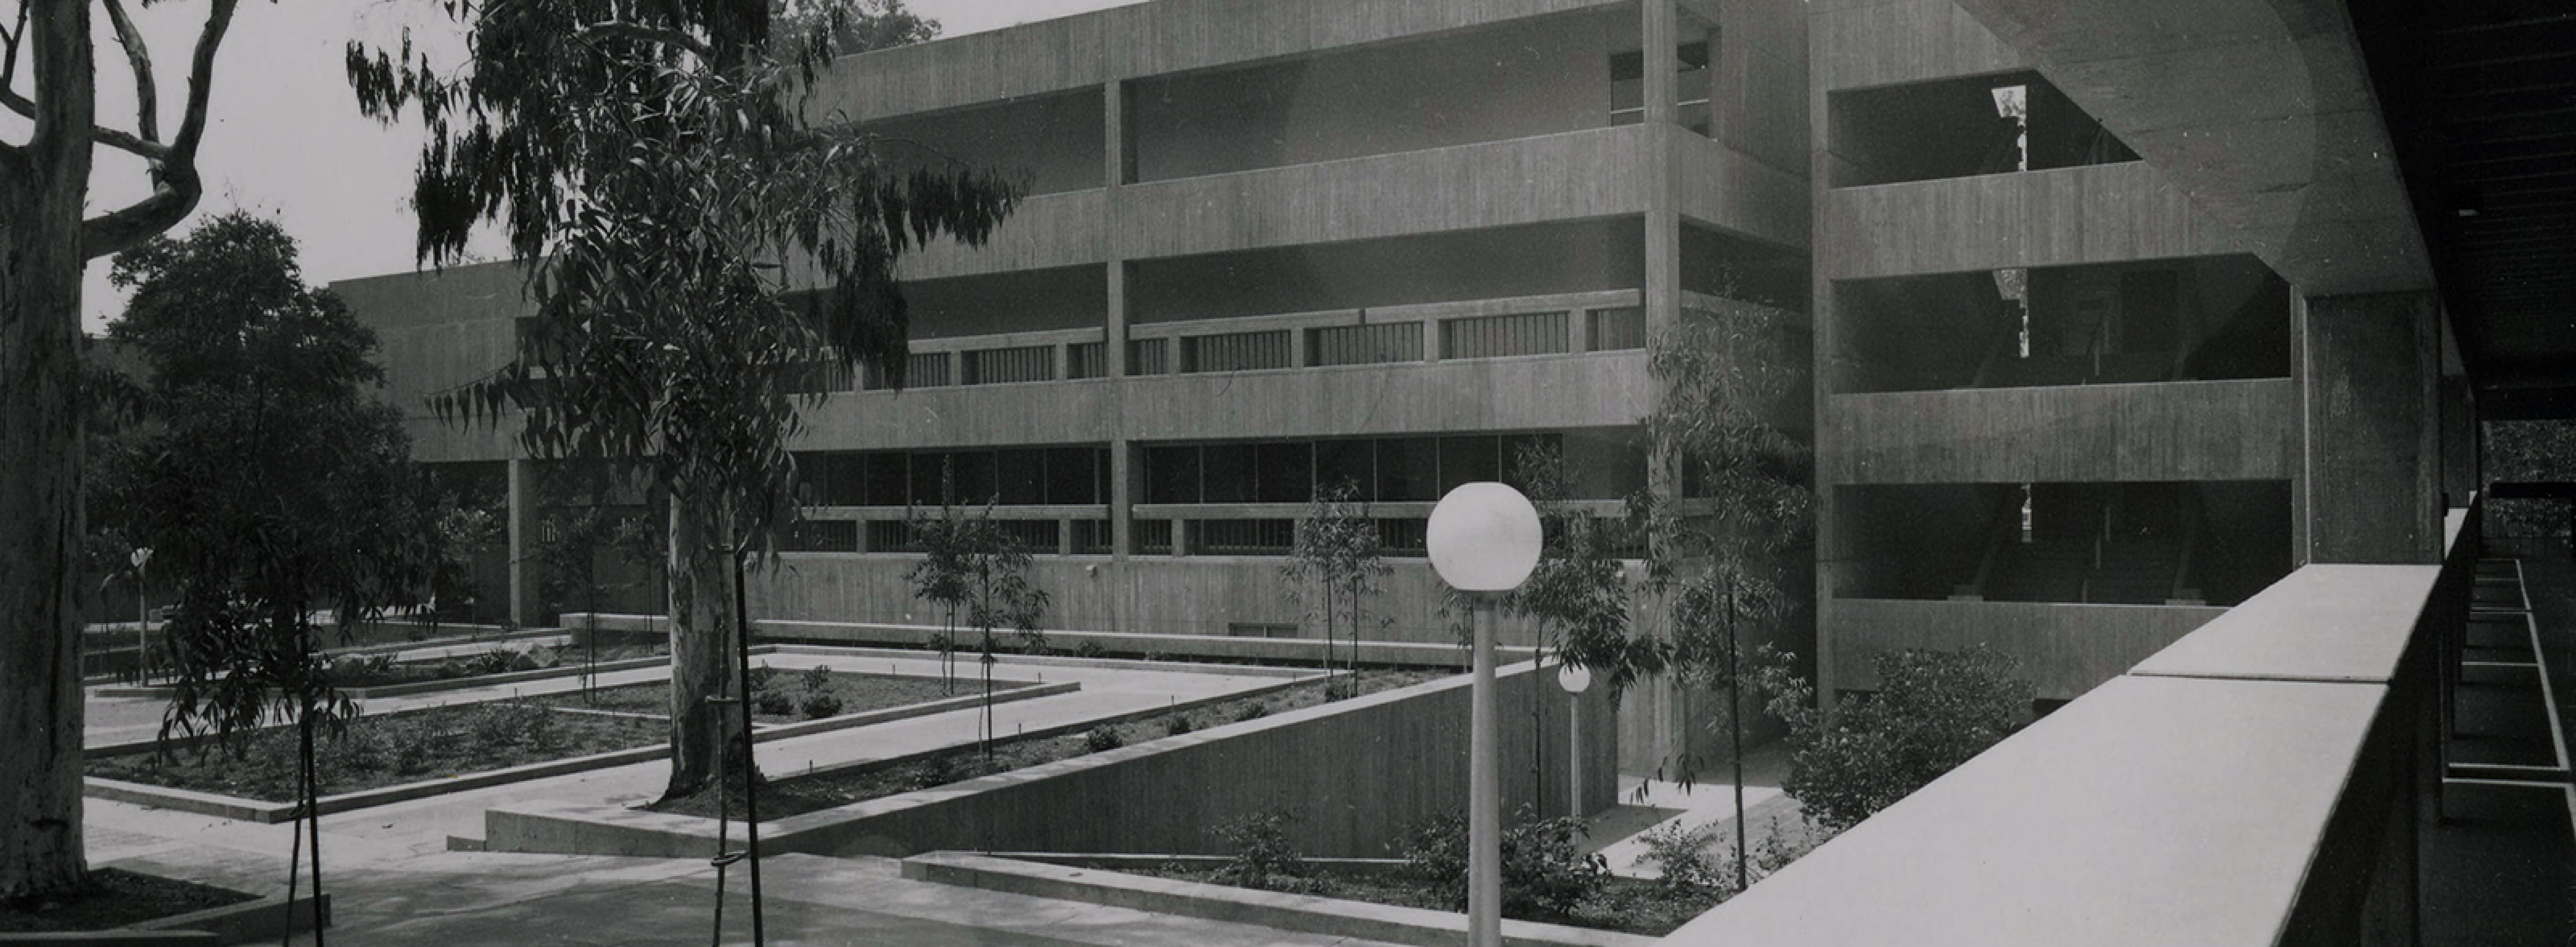 In the 1950s, CMC started a dual-degree program in management and engineering with Stanford.